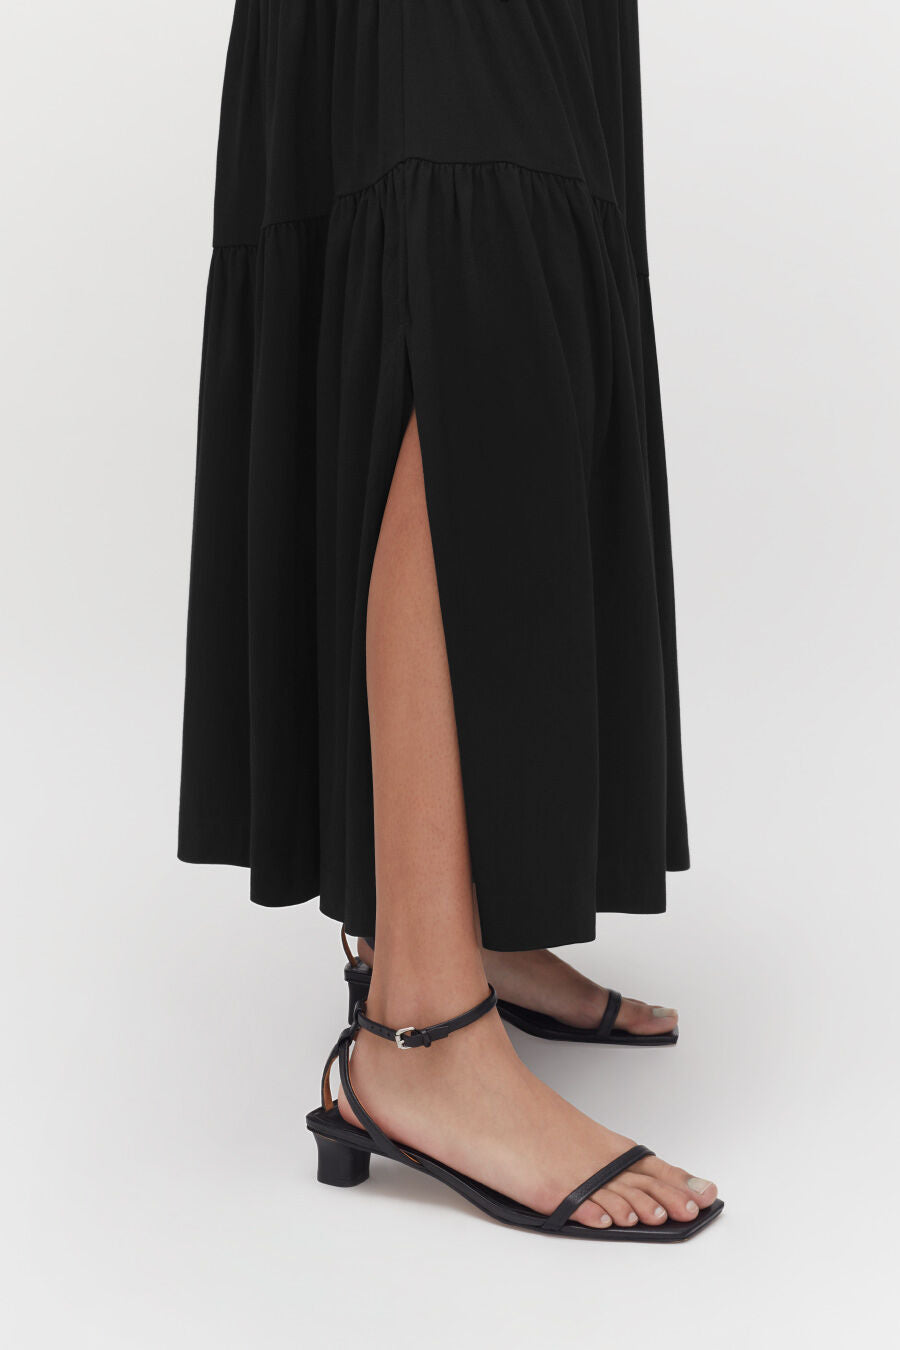 Person wearing a long skirt and heeled sandals showing one leg